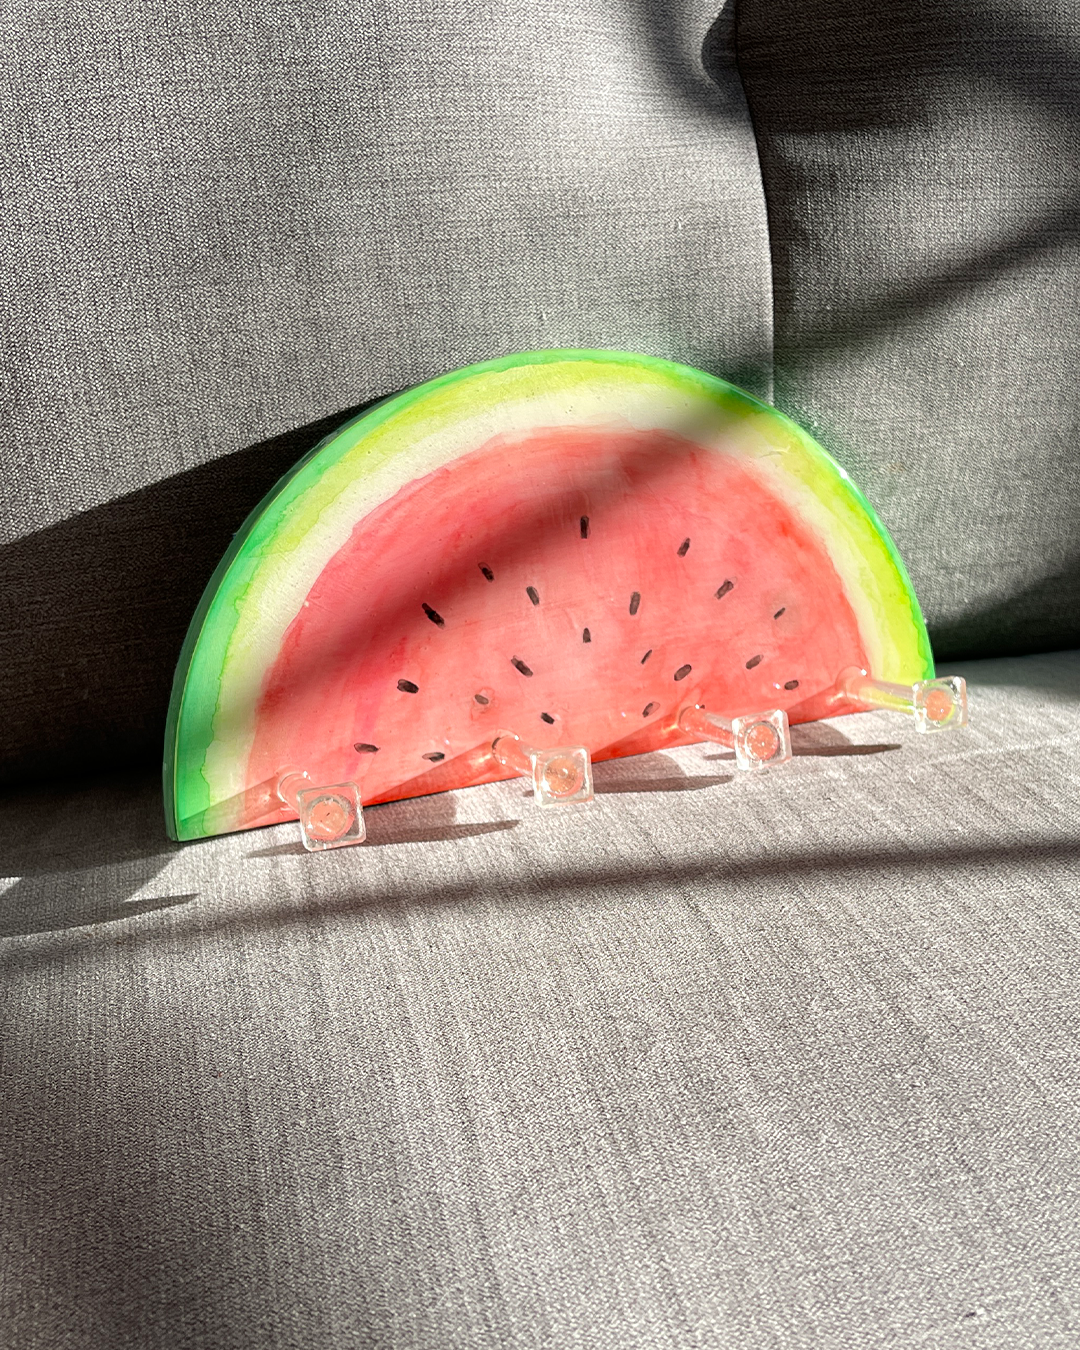 Lightweight and easy-to-install watermelon design key holder, equipped with D-rings for various hanging options.